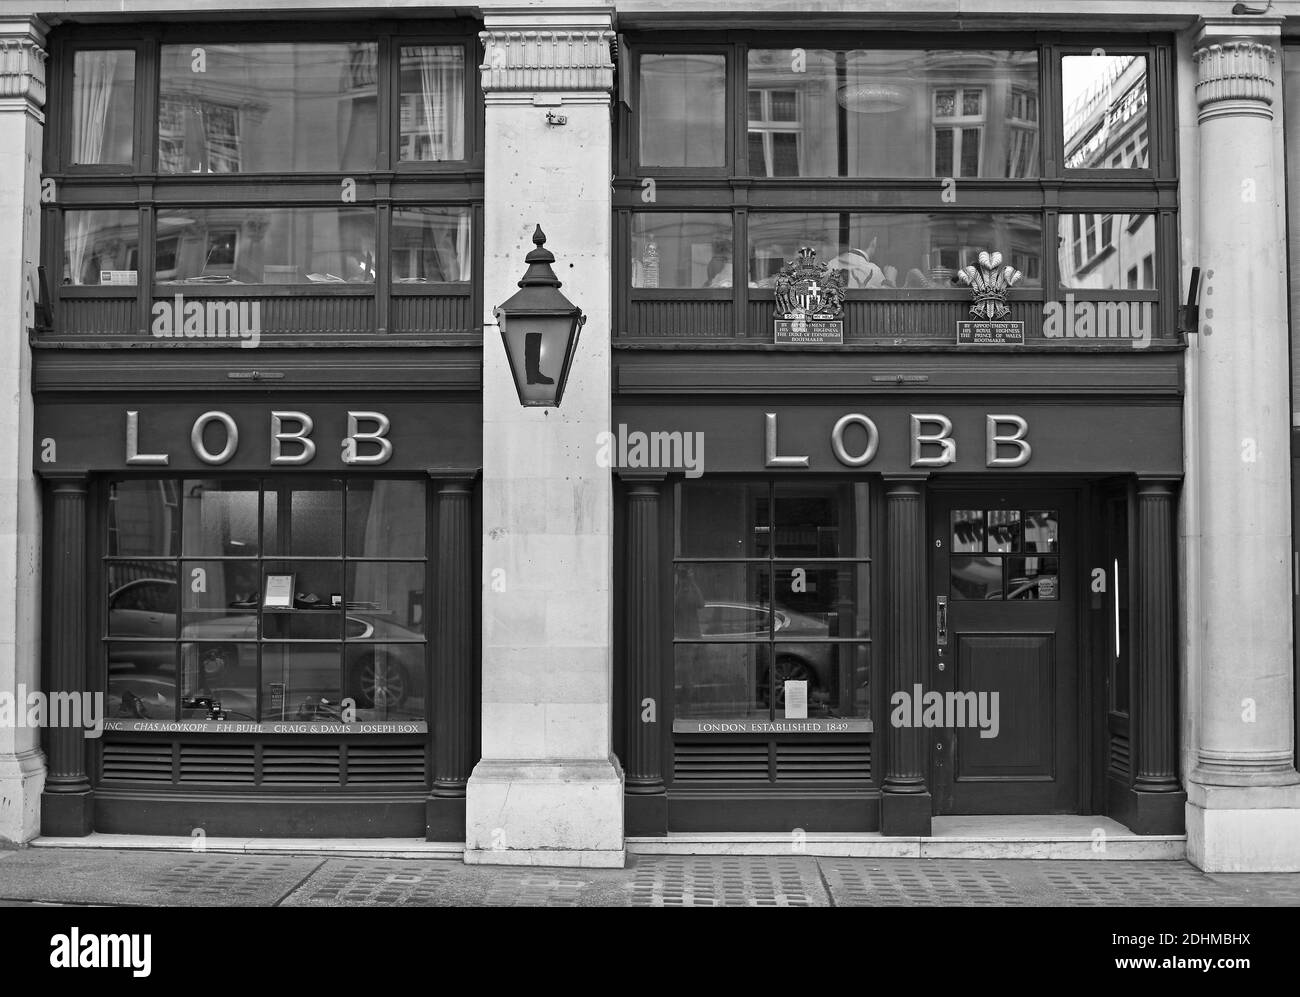 John Lobb shop from outside / Makers of bespoke boots and shoes /The company was established in 1849 by John Lobb.St James , London , United Kingdom. Stock Photo